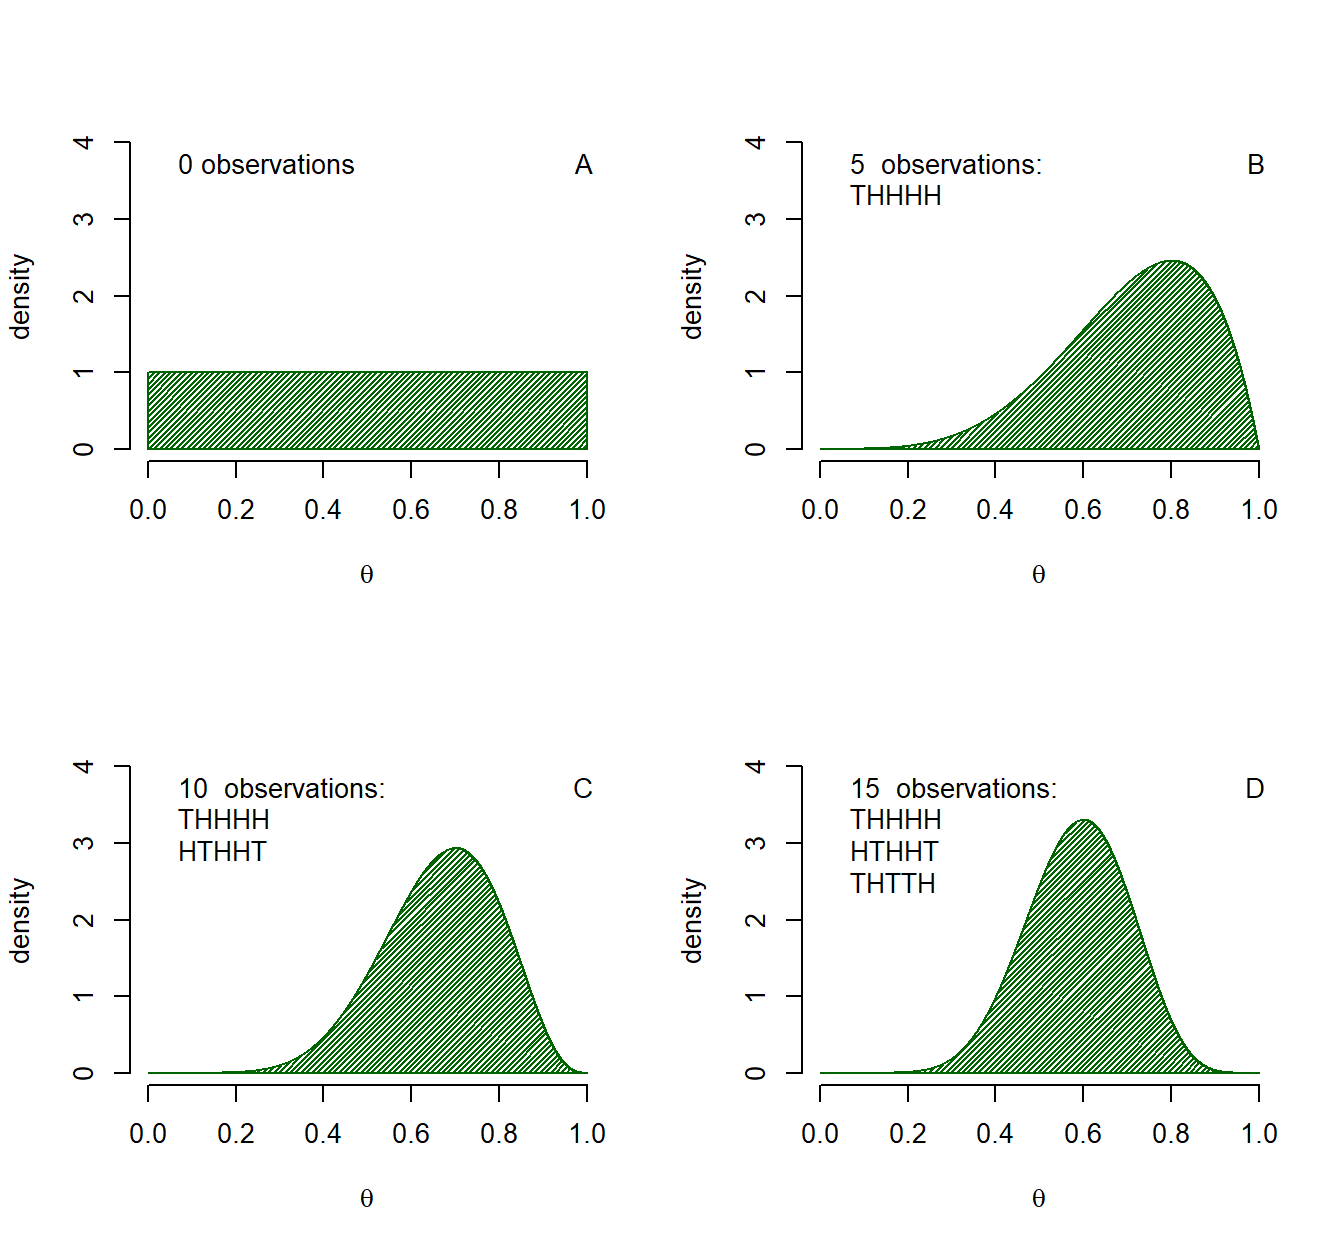 Example of Bayesian updating. Panel A shows a $Beta(\alpha = 1, \beta = 1)$ distribution representing a prior state of knowledge equal to ignorance. Panels B, C and D show how the state of knowledge updated after new data is observed, each time the previous panel is the prior belief for the next panel, combined with the information from five new observations.